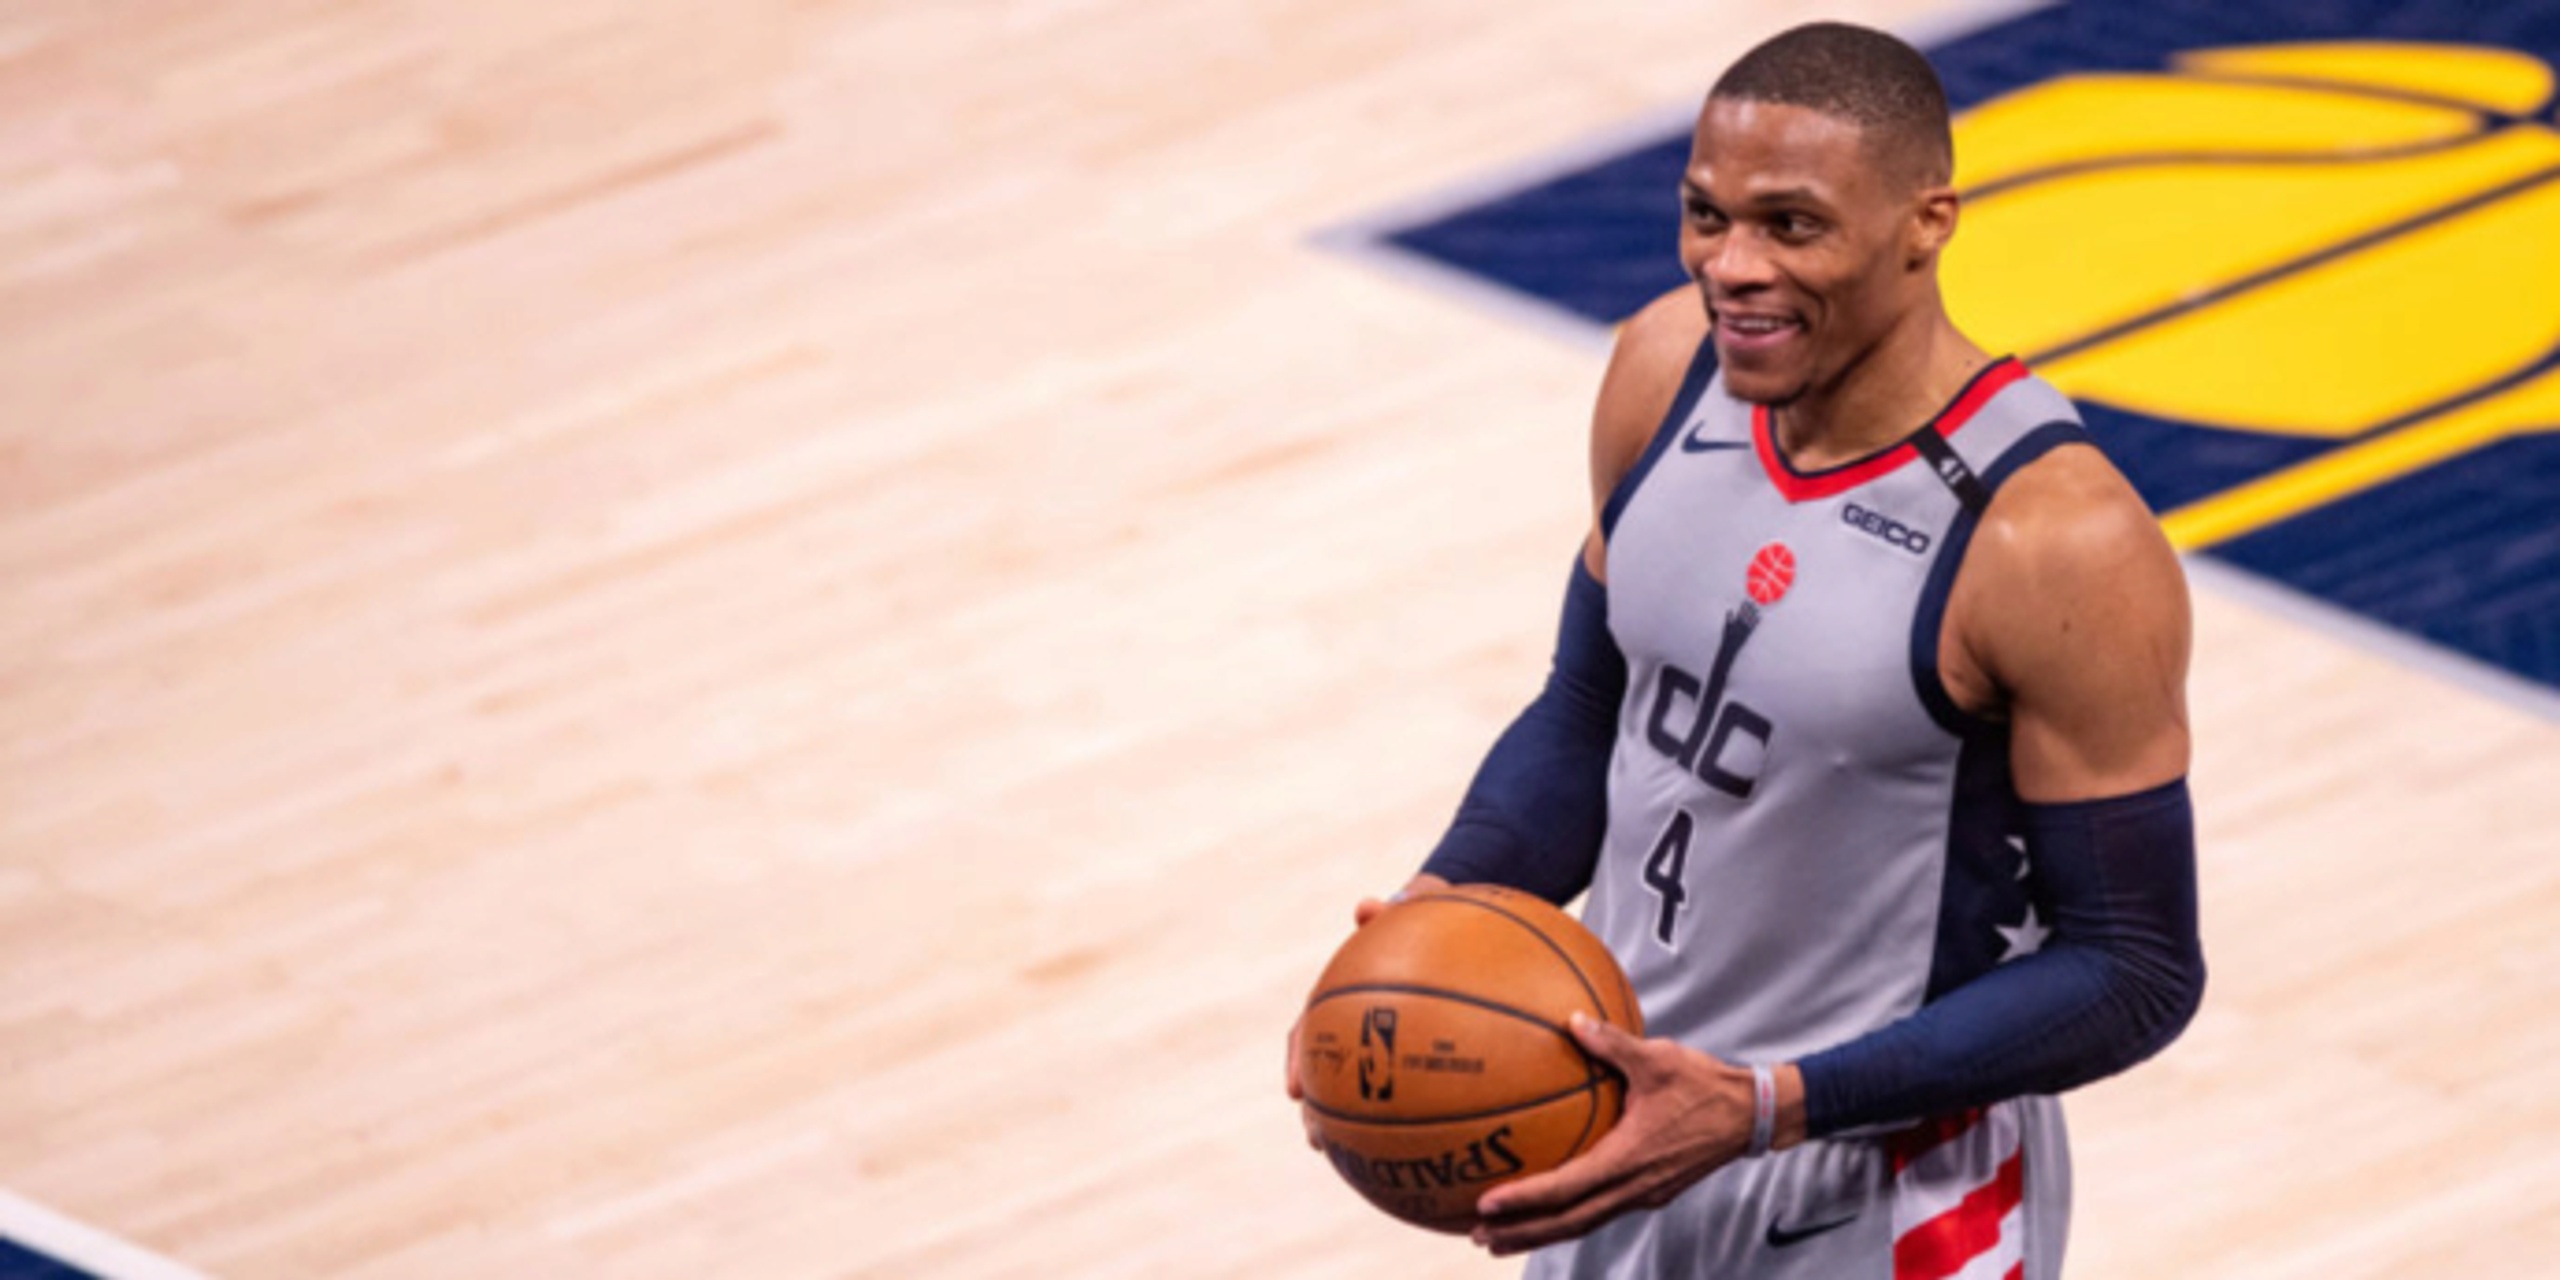 Stop Hating On Brodie: Russell Westbrook’s legacy shouldn't be complicated